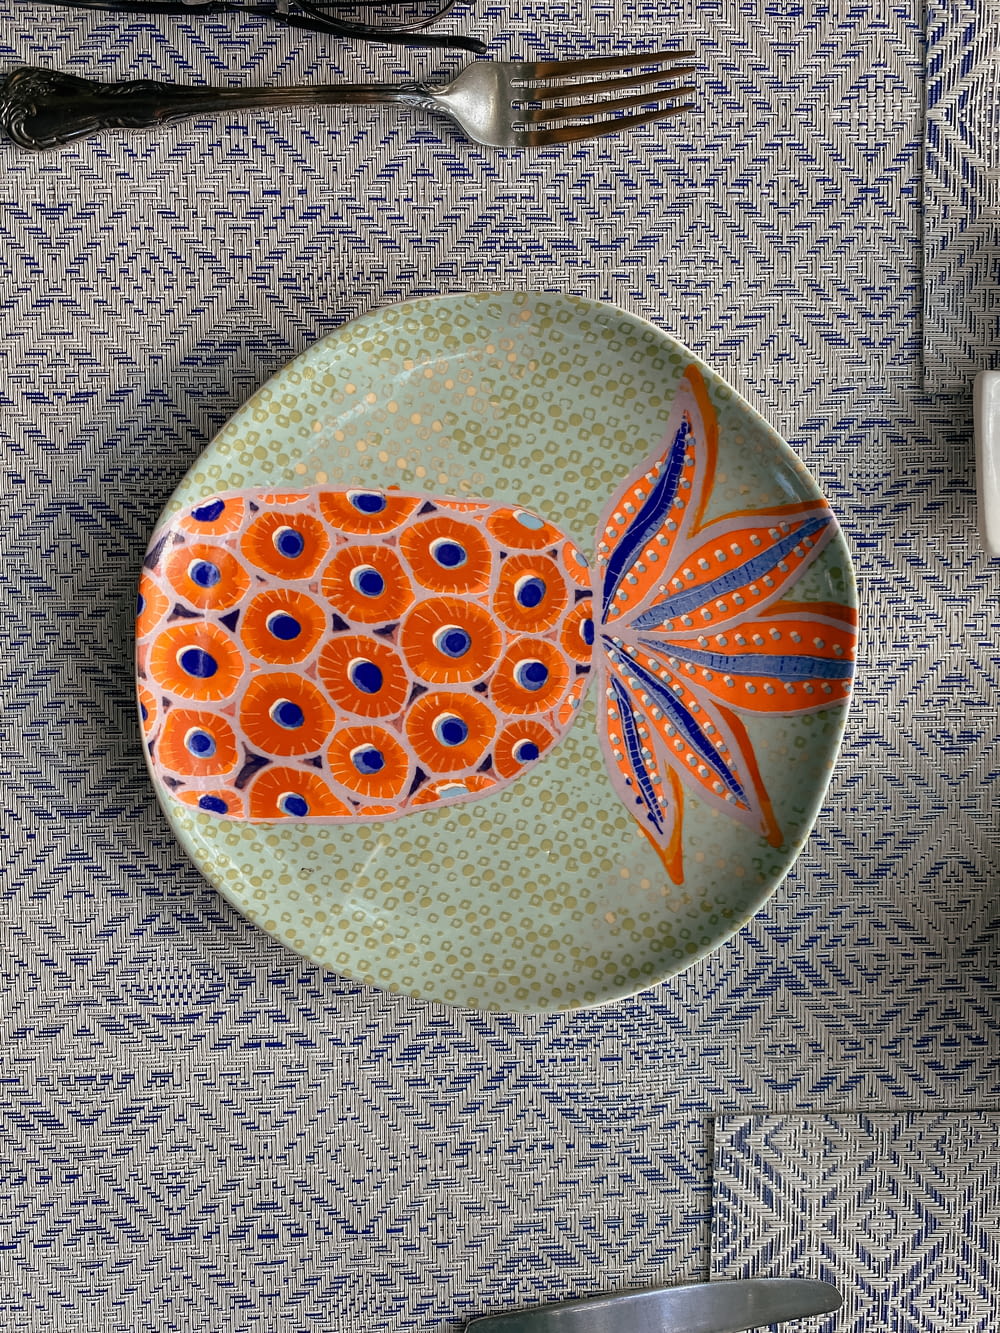 a plate with an orange fish on it